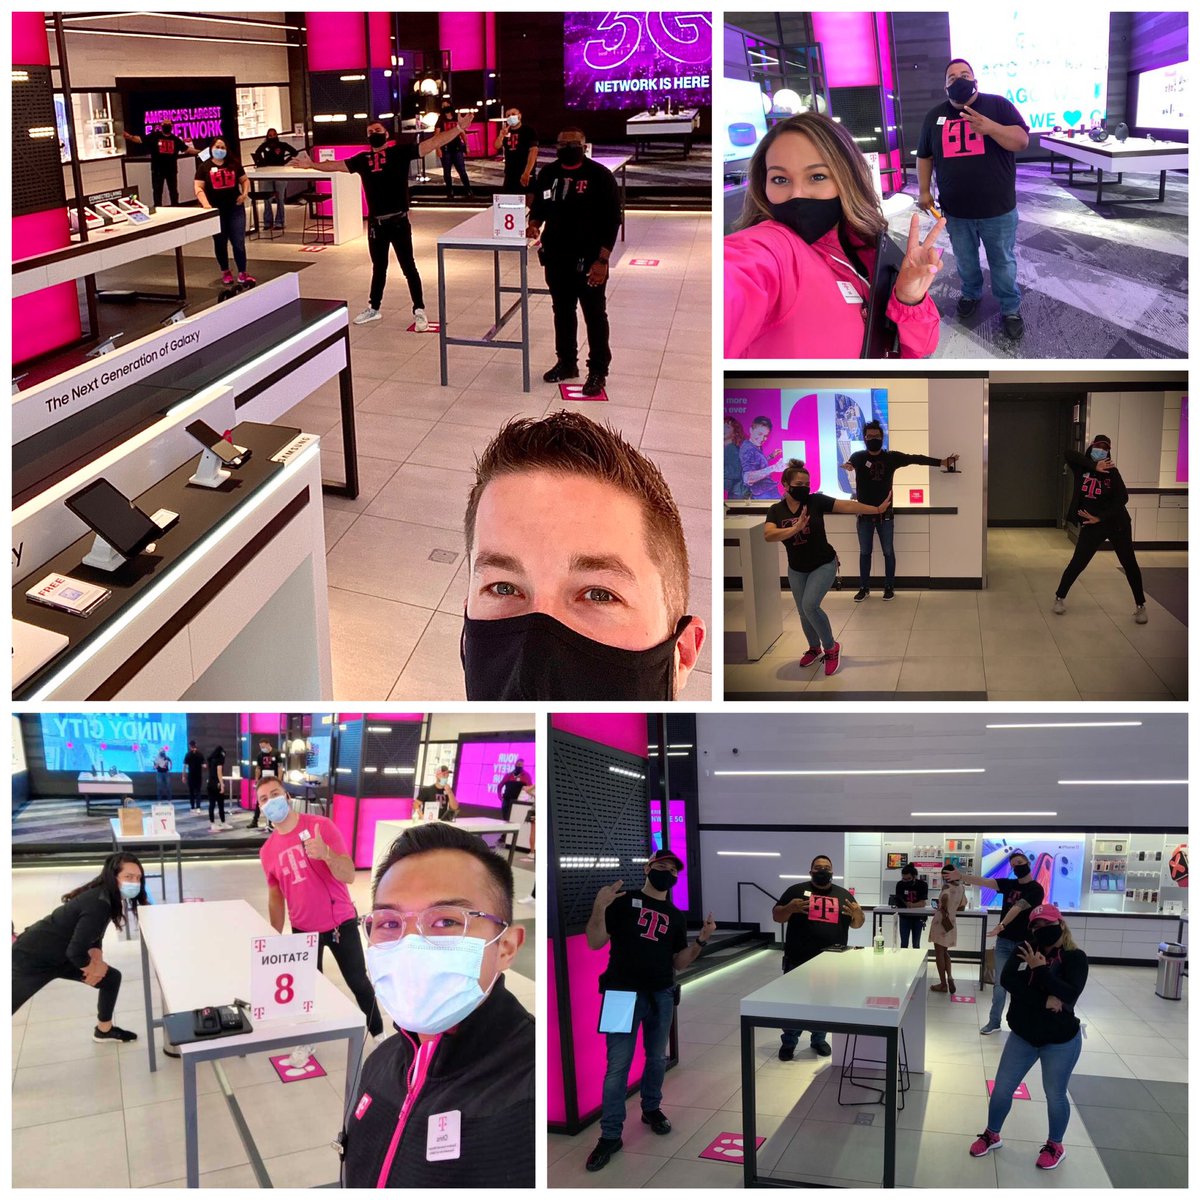 I want to give a big #CentralThanks to the entire Mag Mile Team! We had an amazing first week back, I couldn’t be more proud of our team’s execution, agility, and their commitment to providing the BEST experience for our customers! #FirstAndFast #MagMileStyle 💕🙌🏼